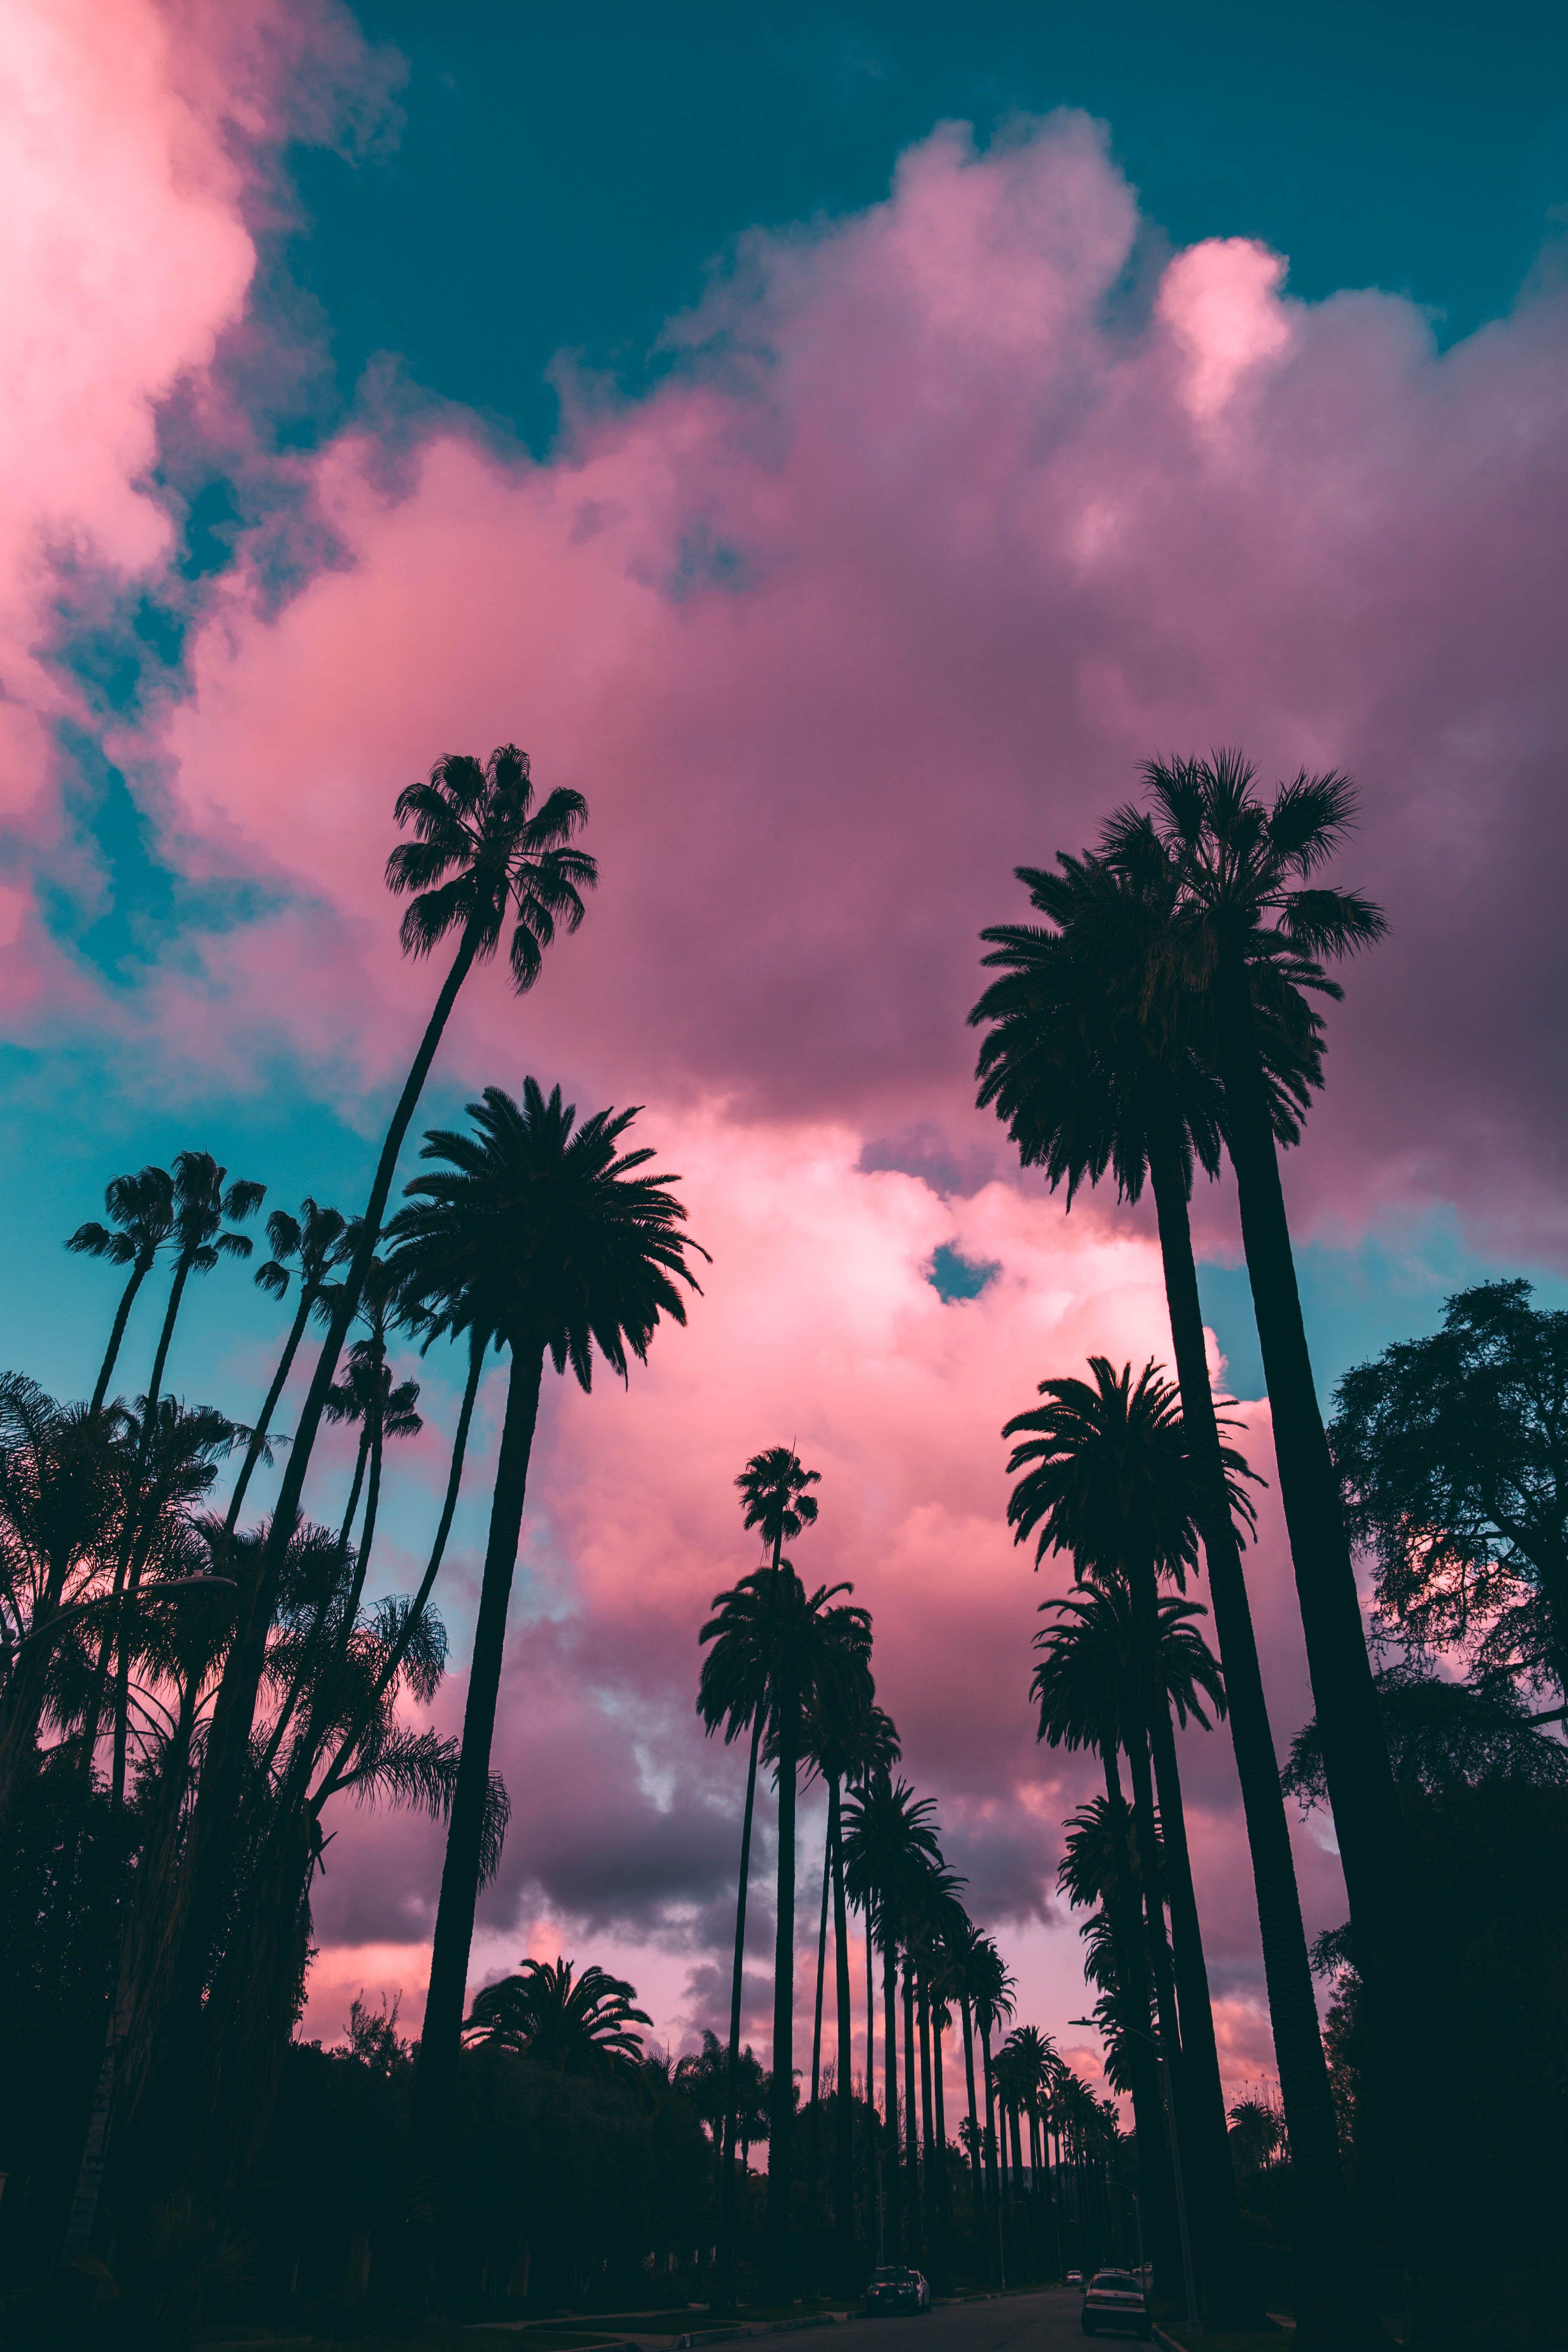 Wallpaper Background Pink Palm Trees Images  Free Photos PNG Stickers  Wallpapers  Backgrounds  rawpixel